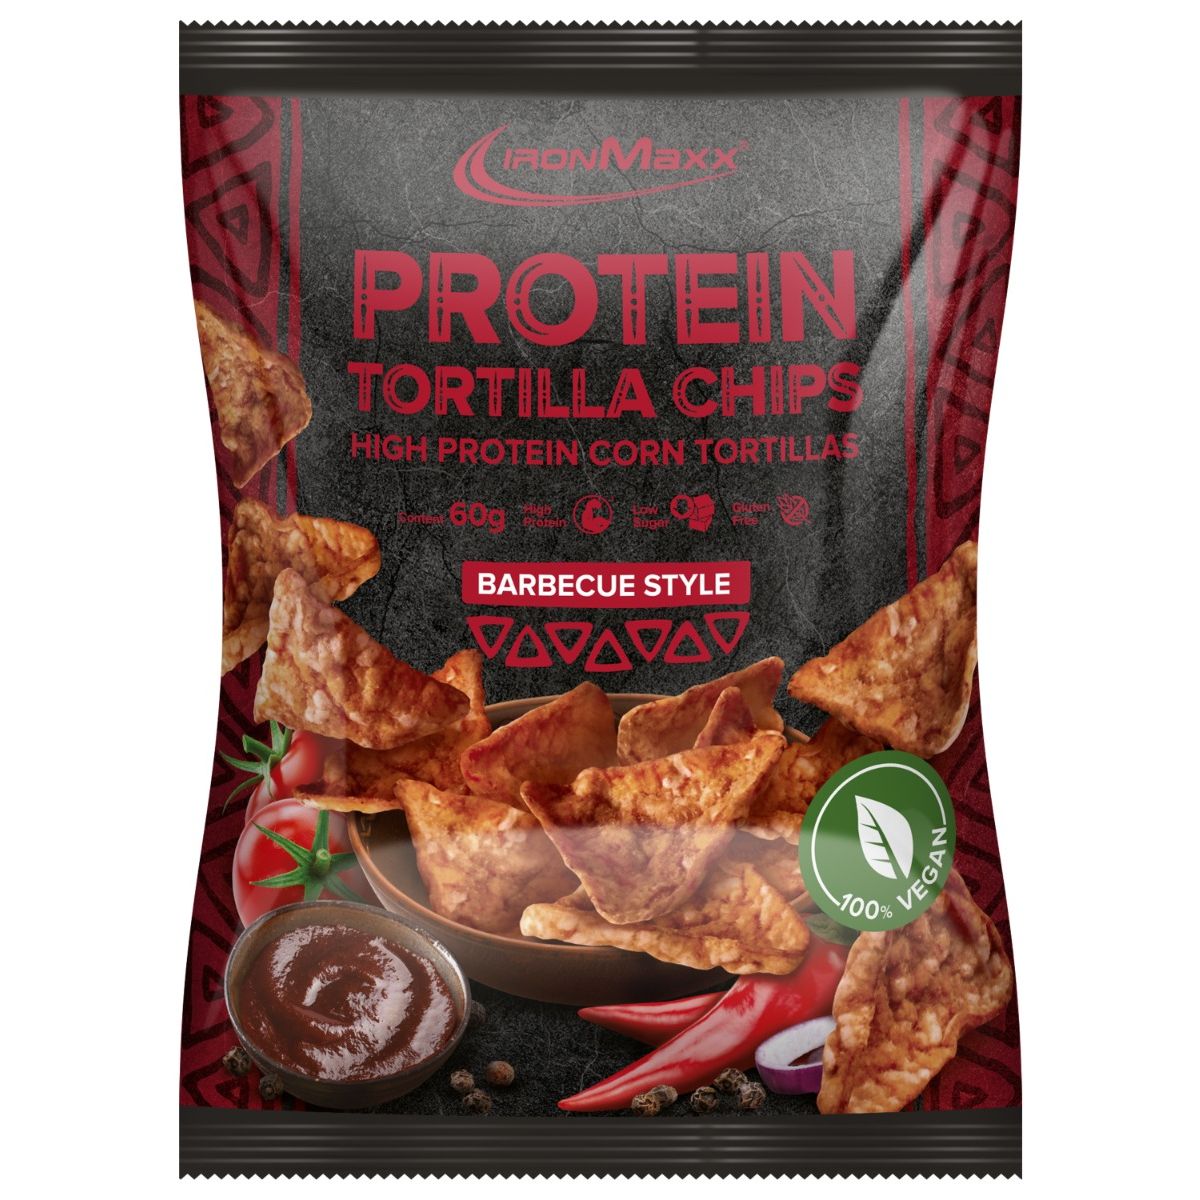 Protein Tortilla Chips (60g) - Barbecue Style (MHD: 30.06.2024)